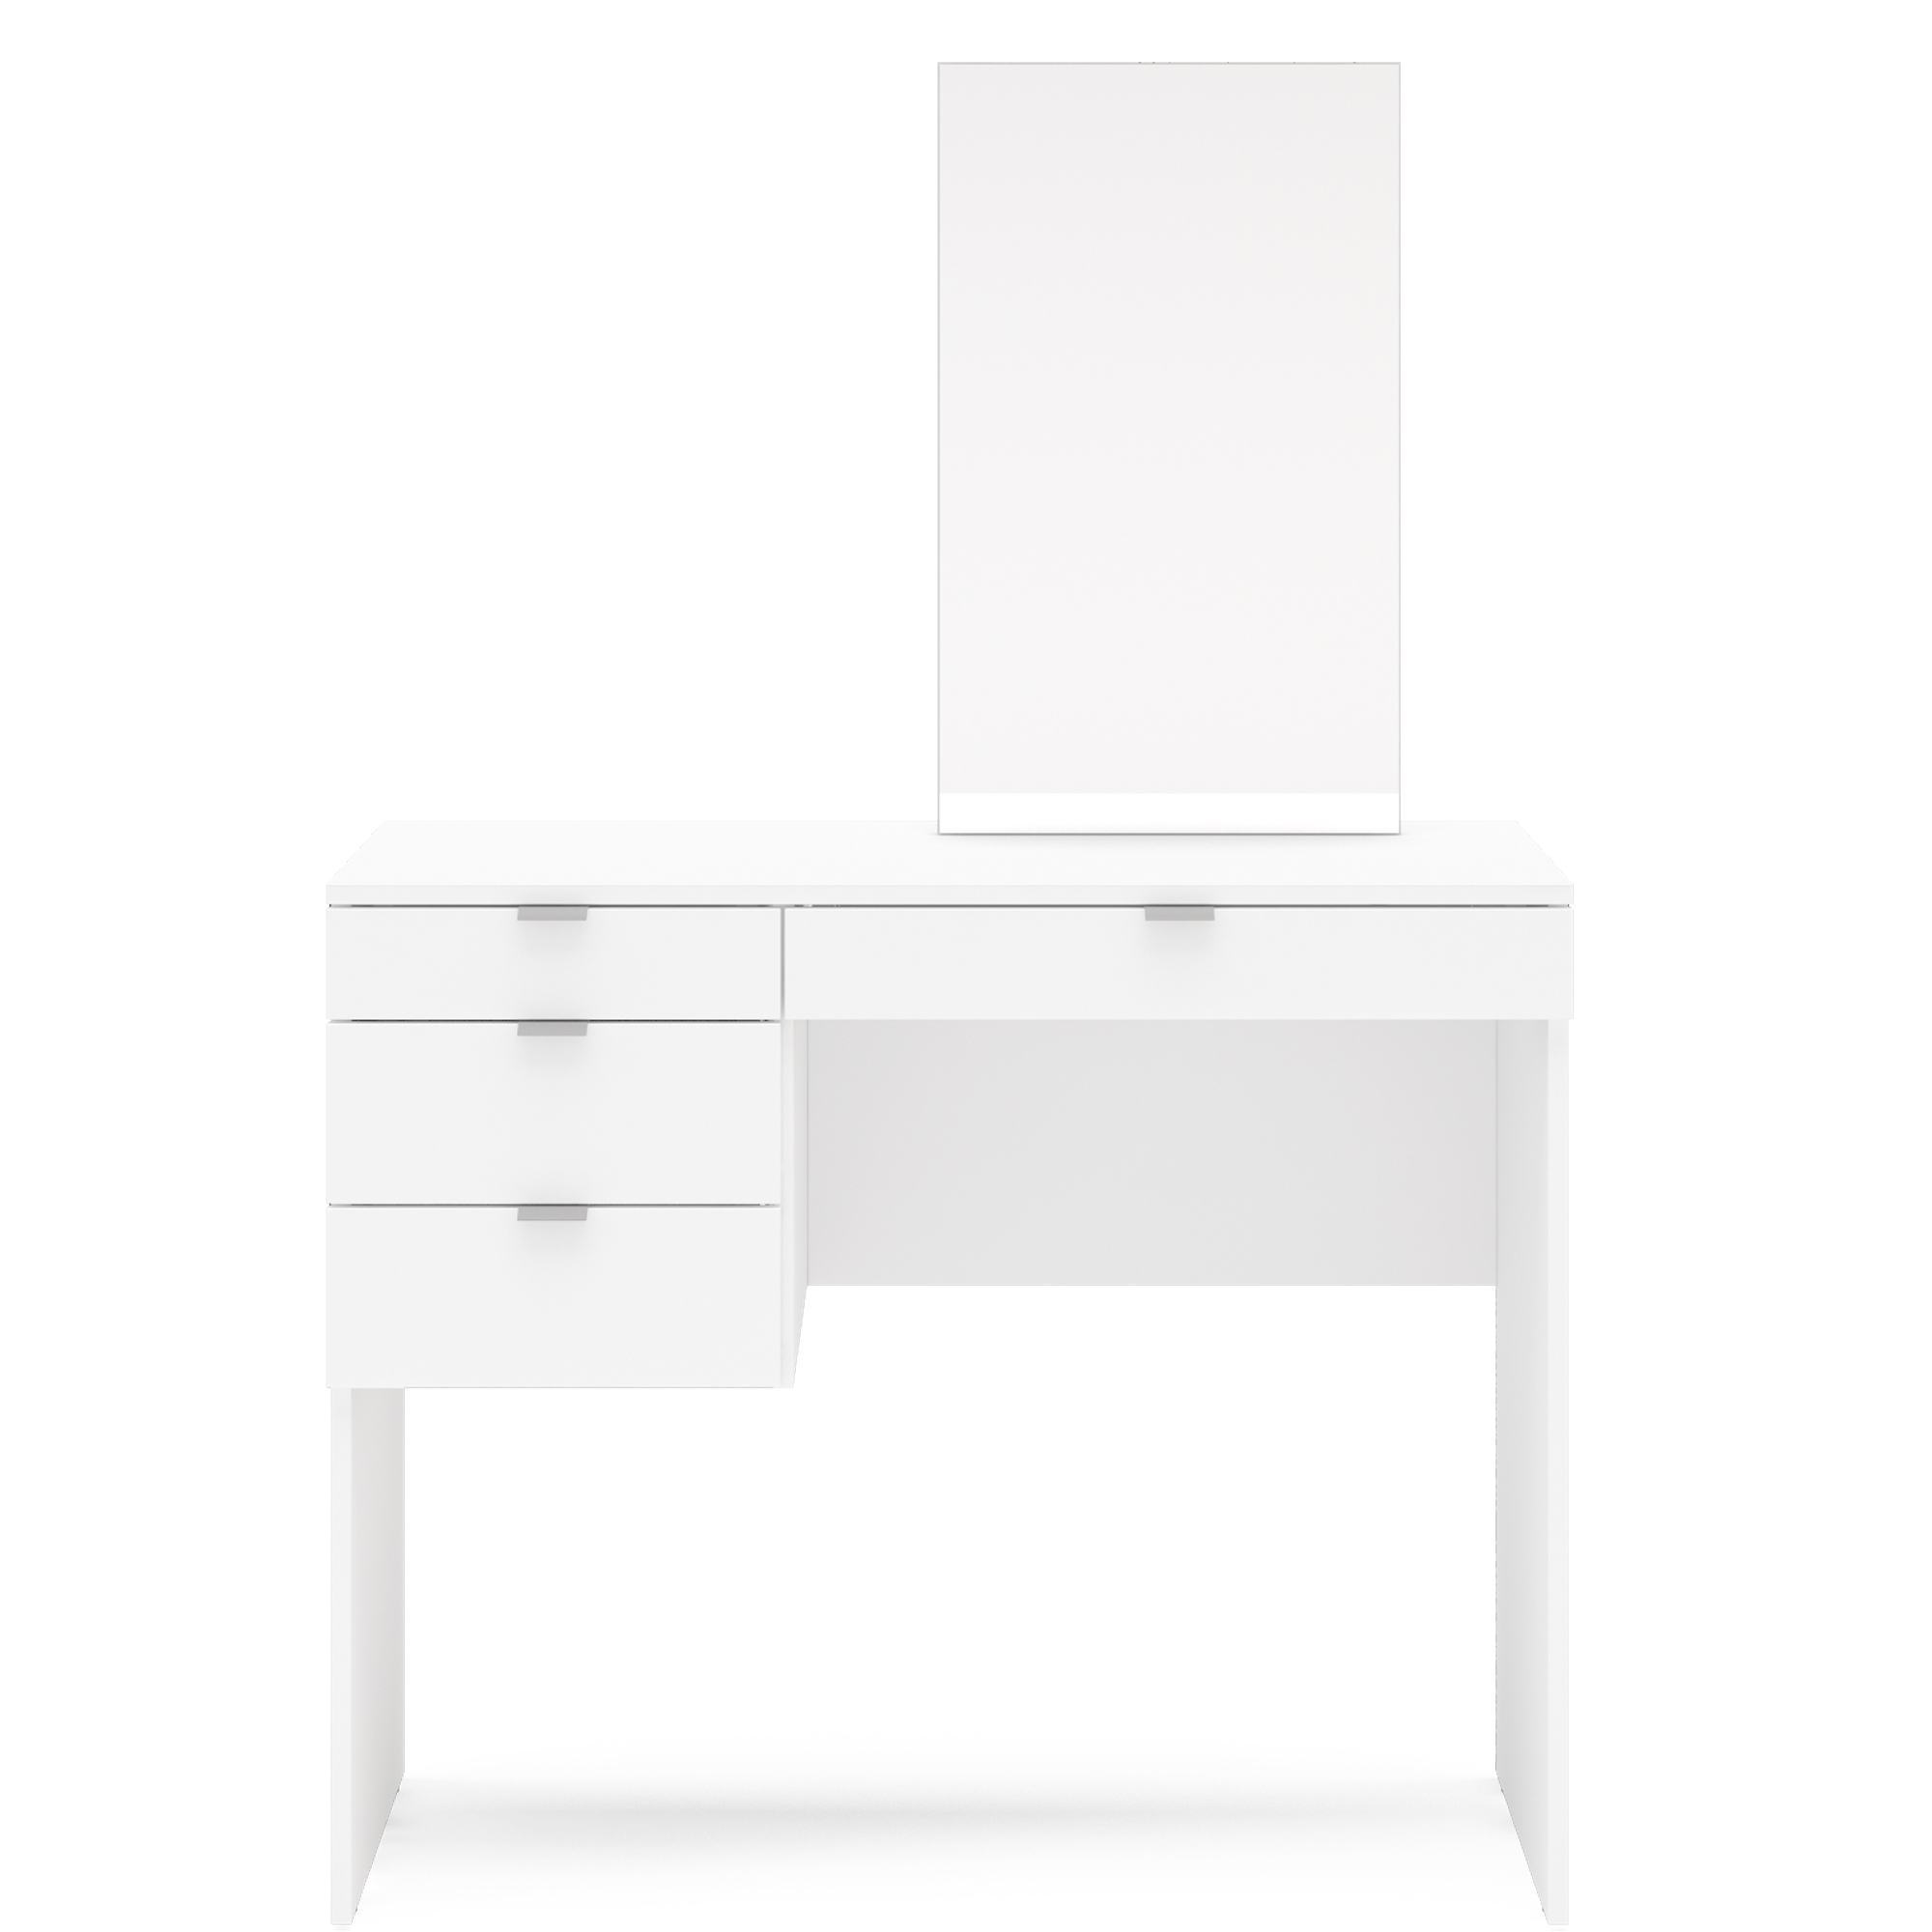 Boahaus Maia Modern Vanity Table, White Finish, for Bedroom - image 2 of 9